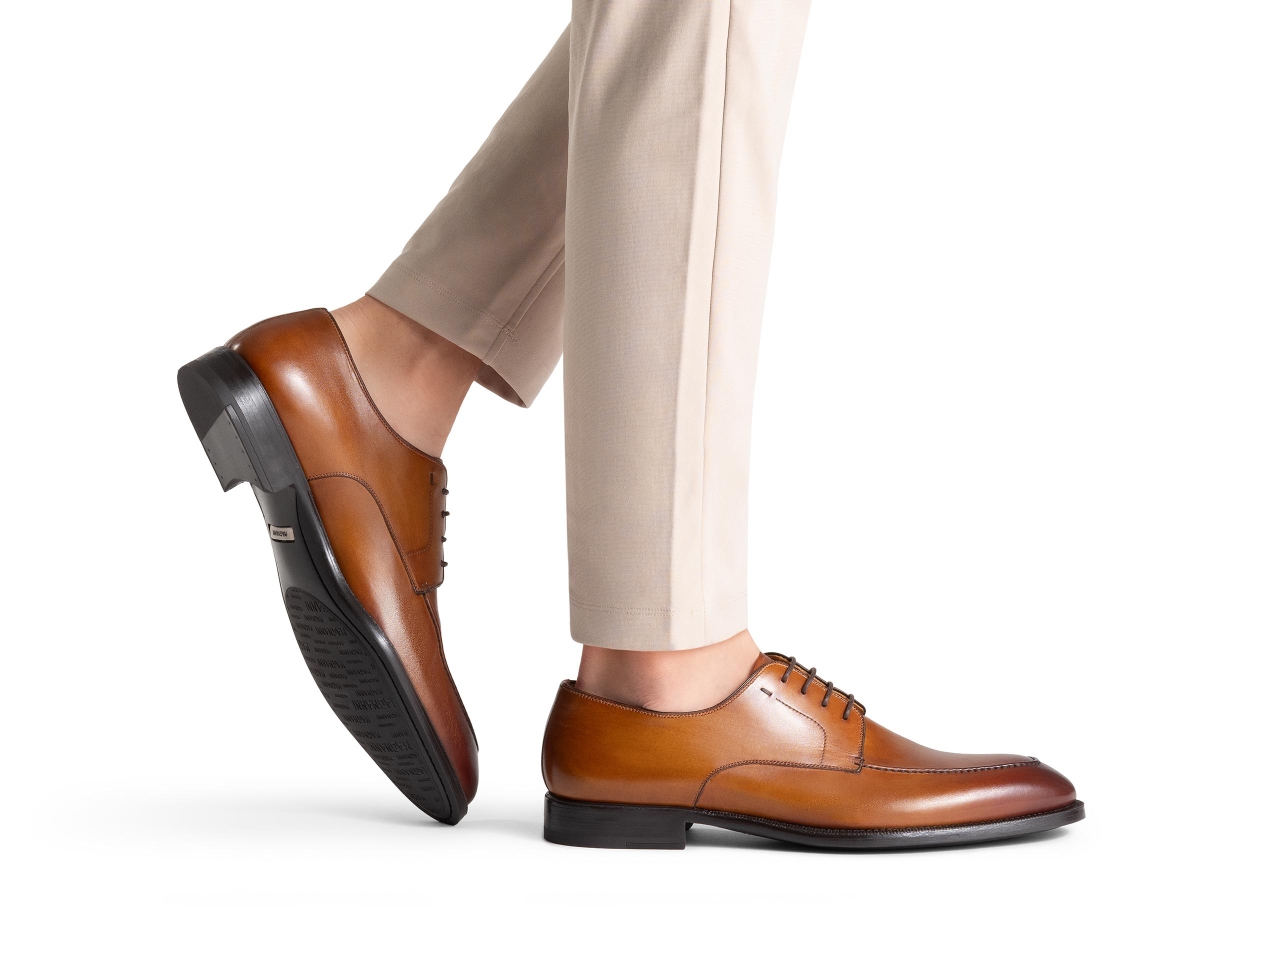 The Alva Tabaco pairs well with light color dress pants